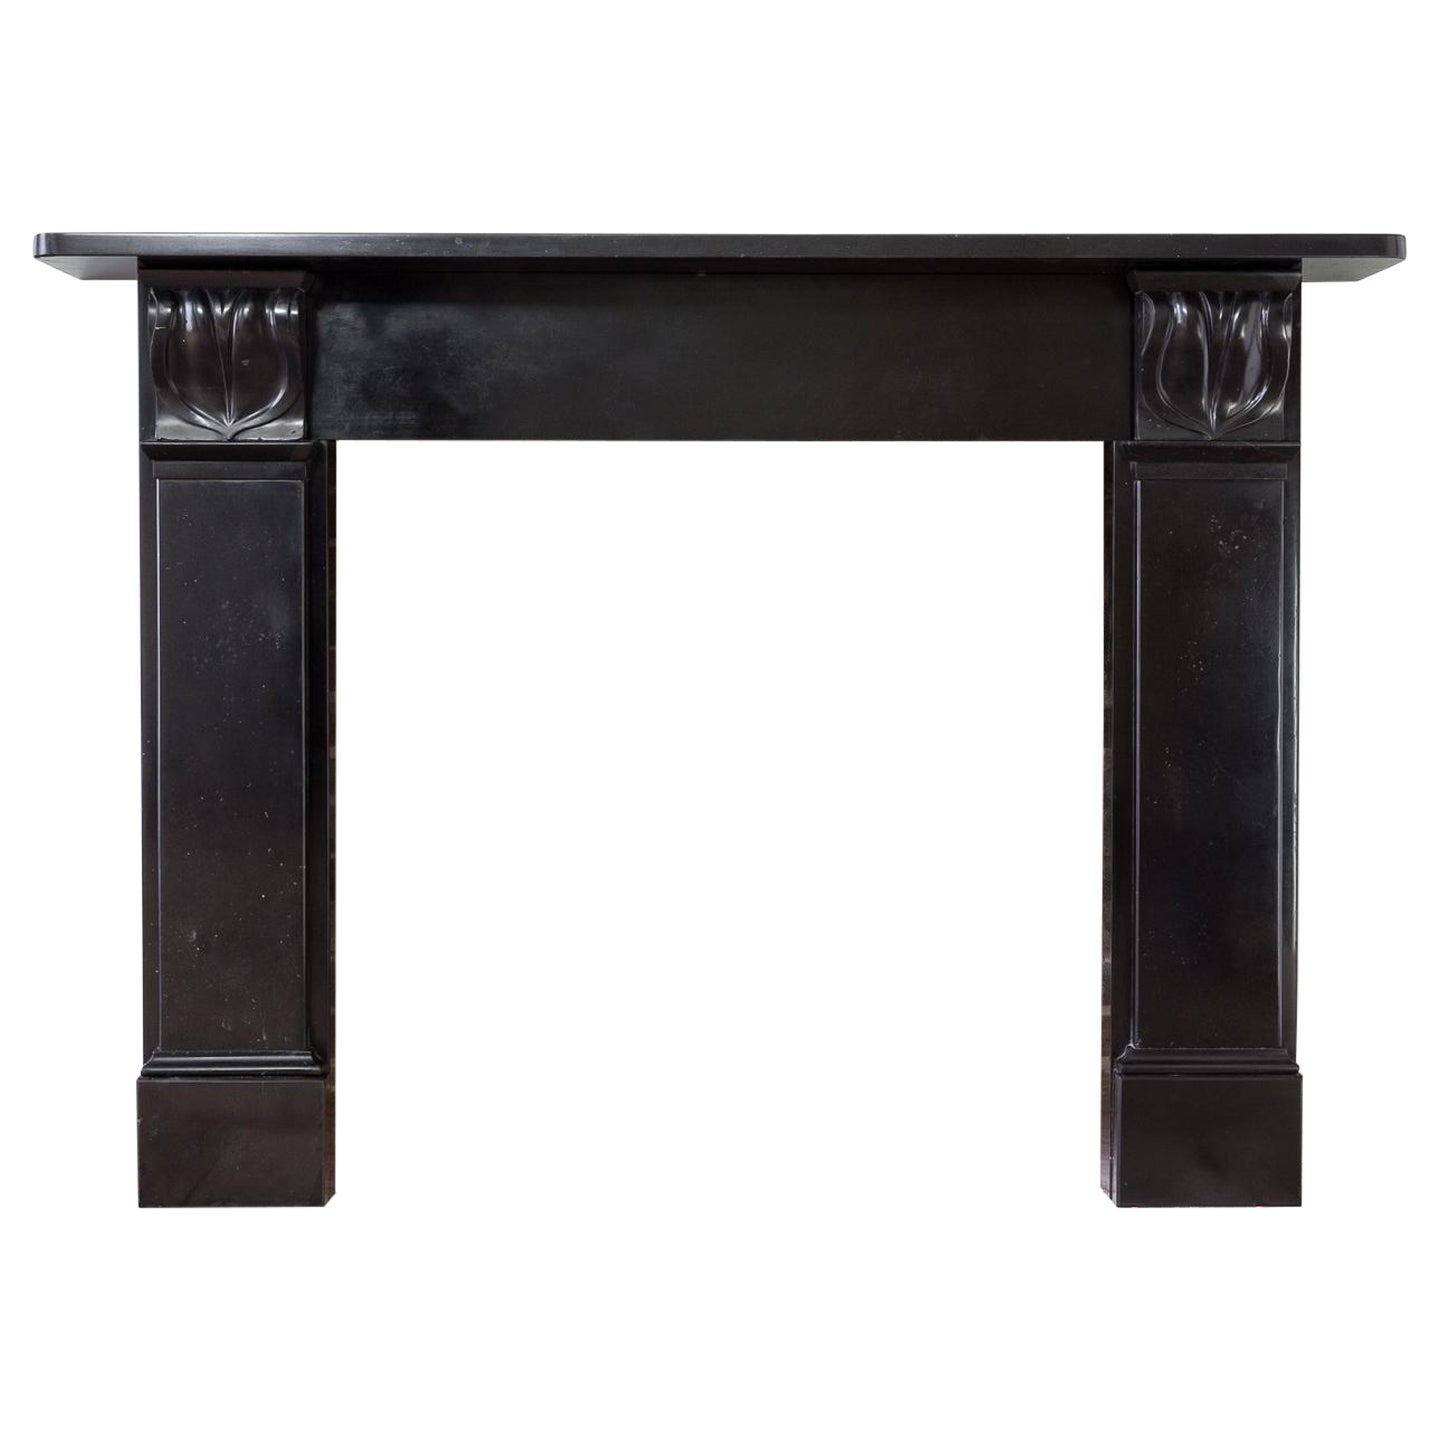 William IV Black Belgian Marble Fireplace For Sale